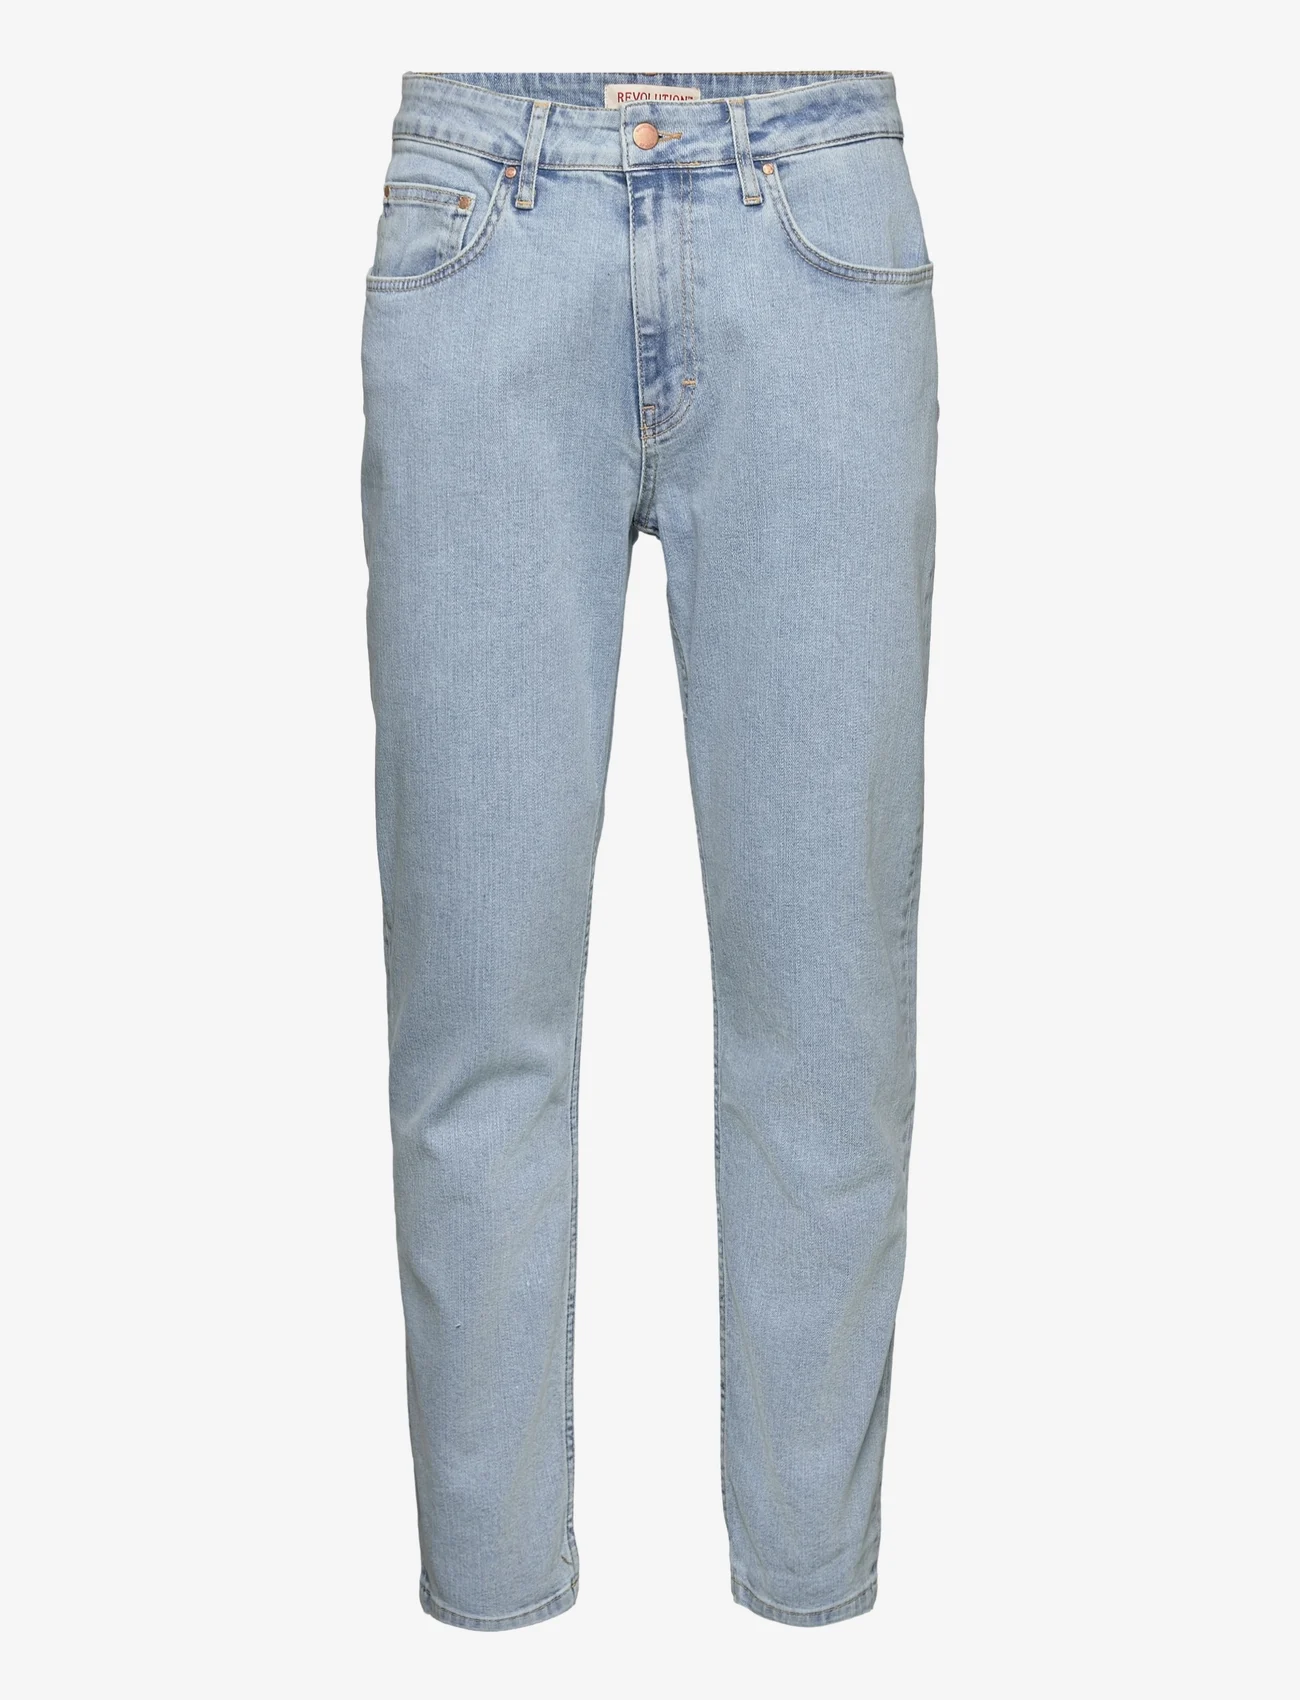 Revolution - Loose-fit Jeans - relaxed jeans - blue - 0